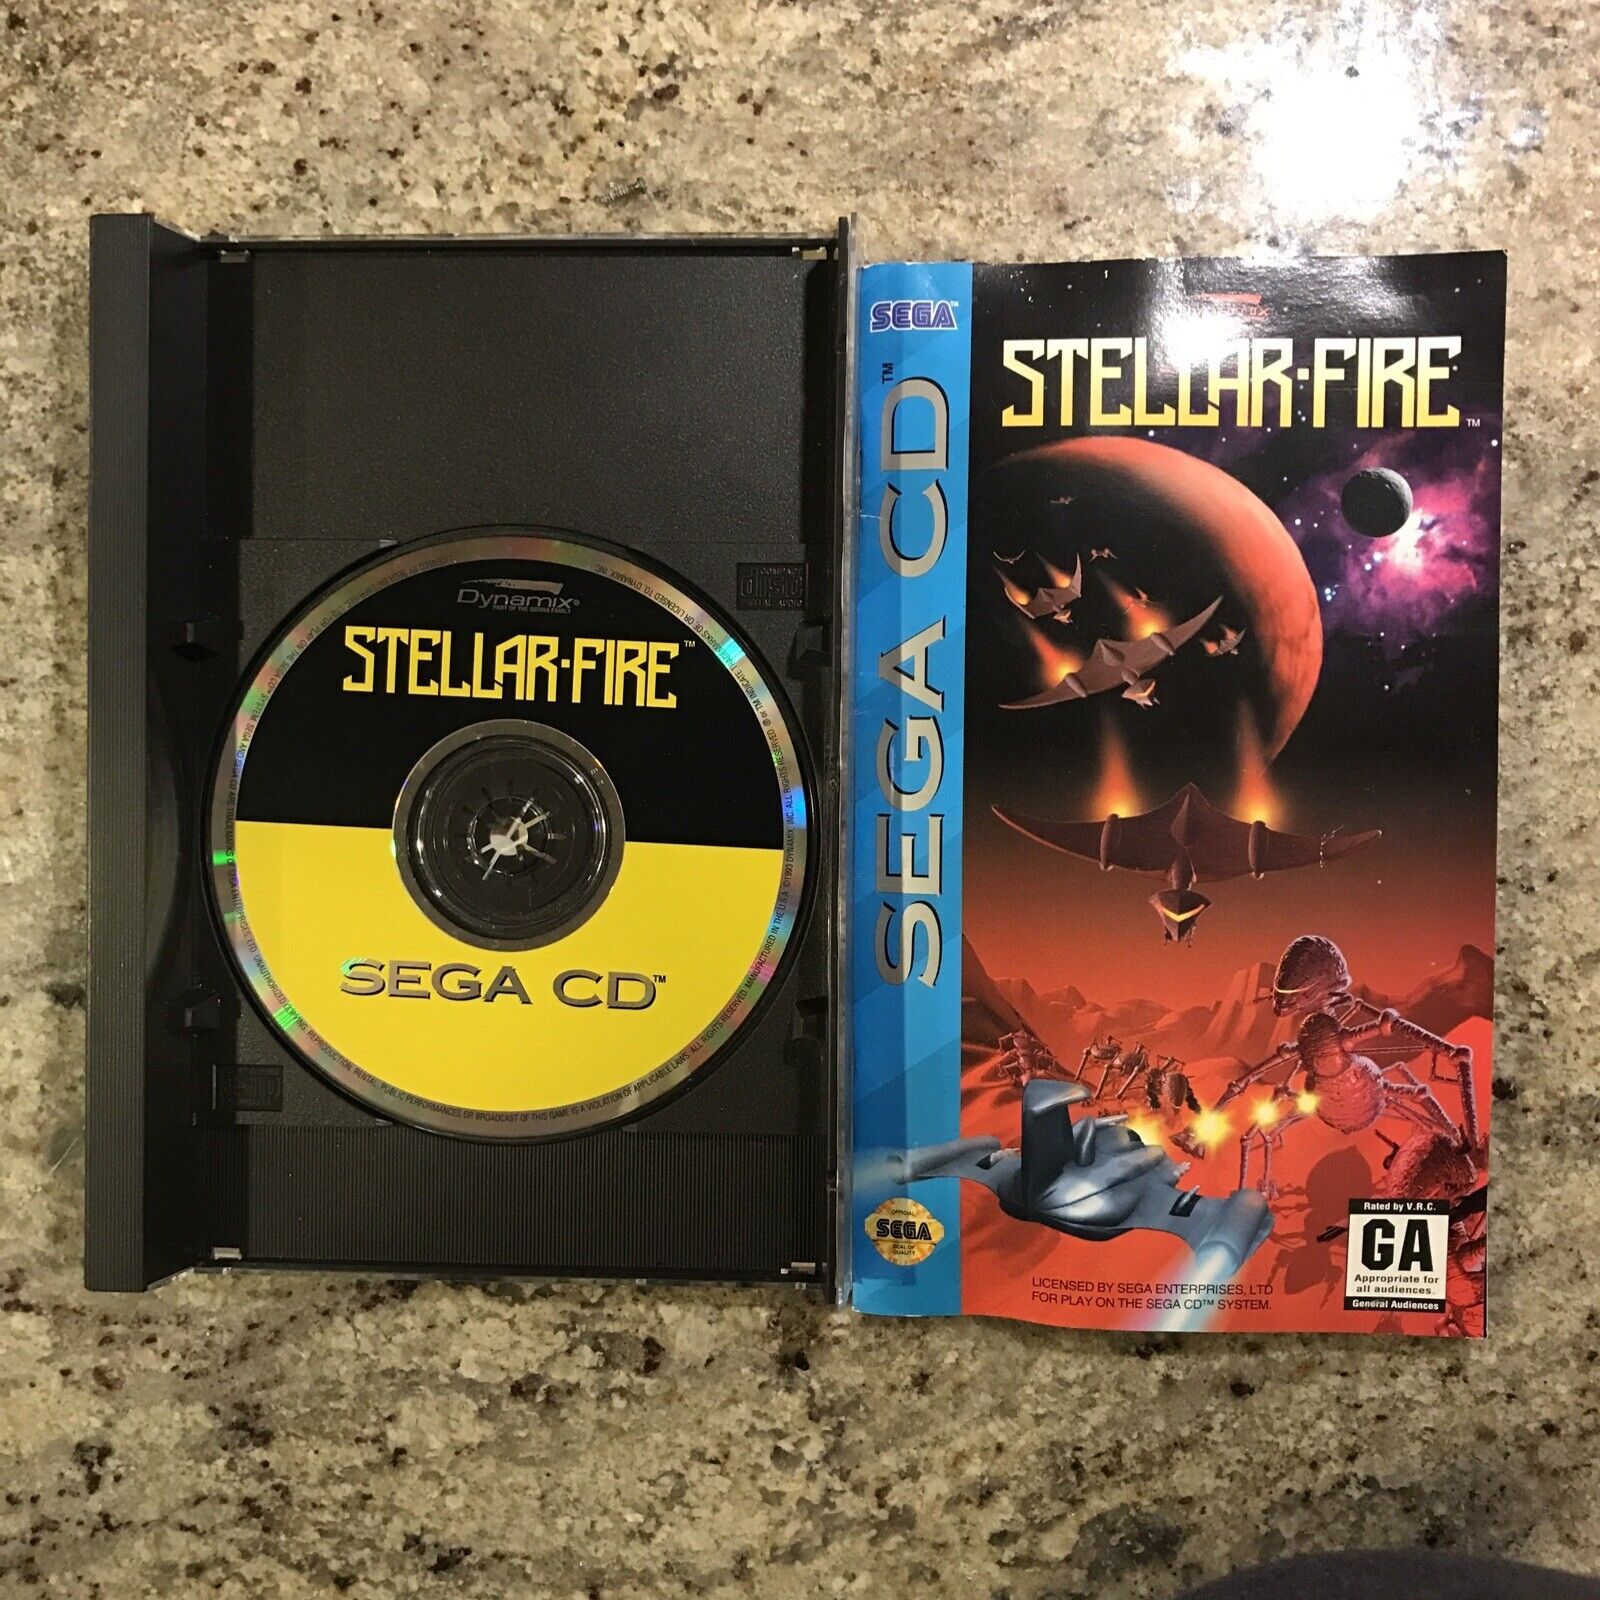 Sega CD Stellar-Fire Complete With Manual and Game Disc